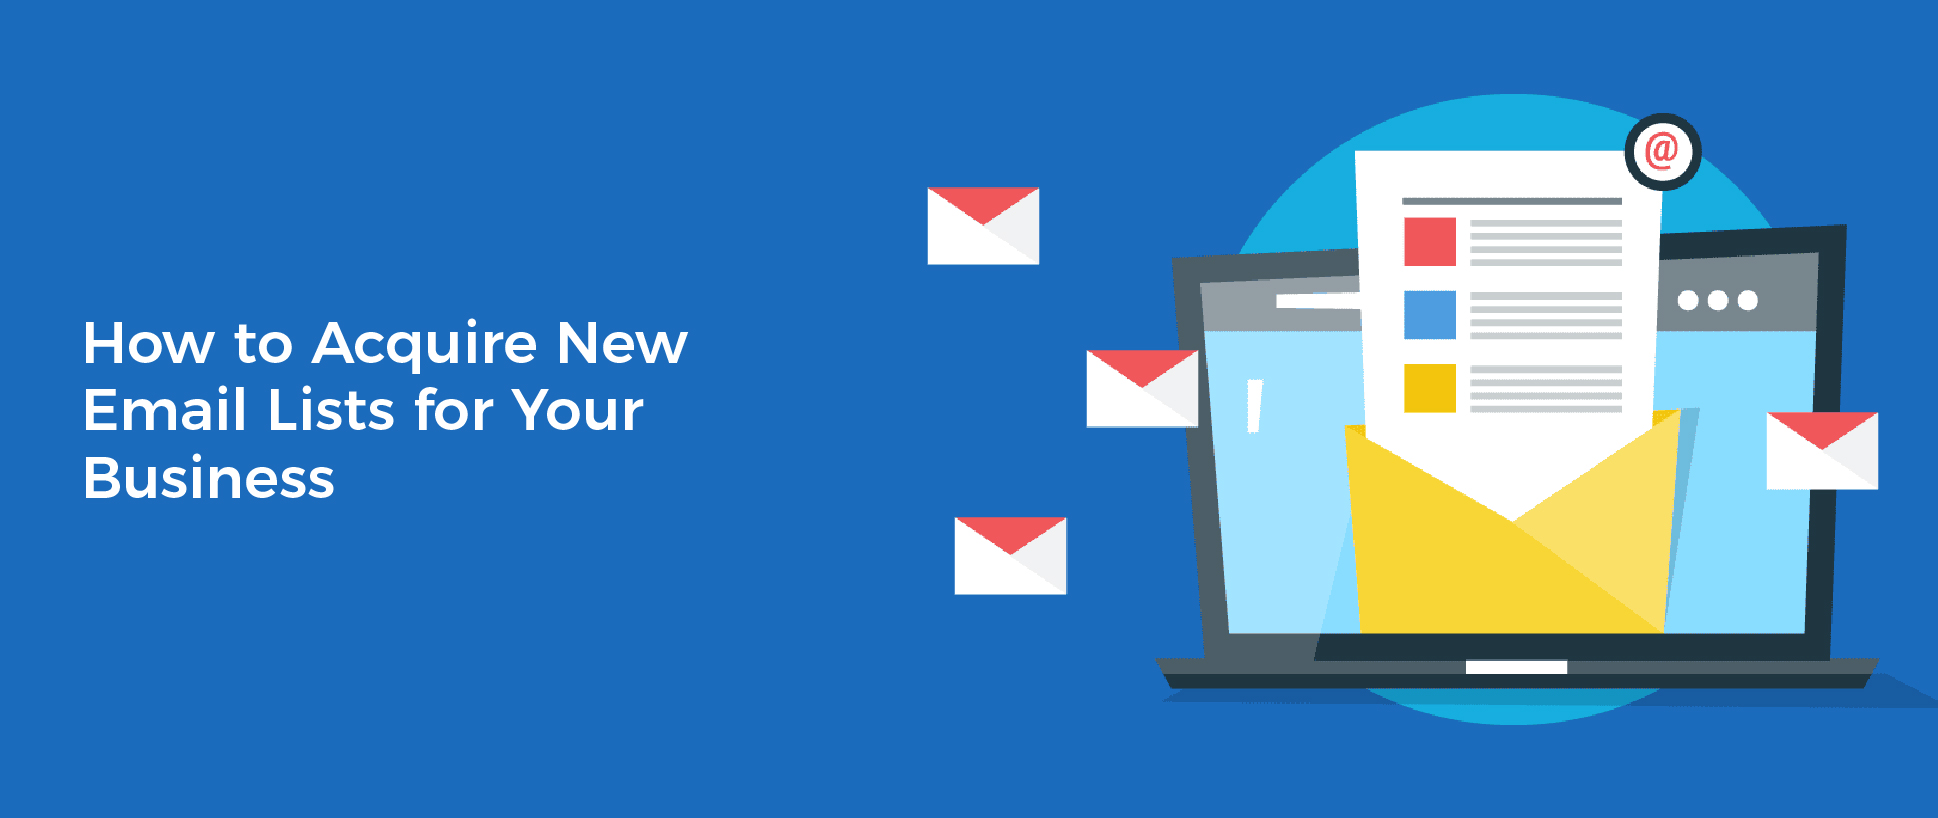 How to Acquire New Email Lists